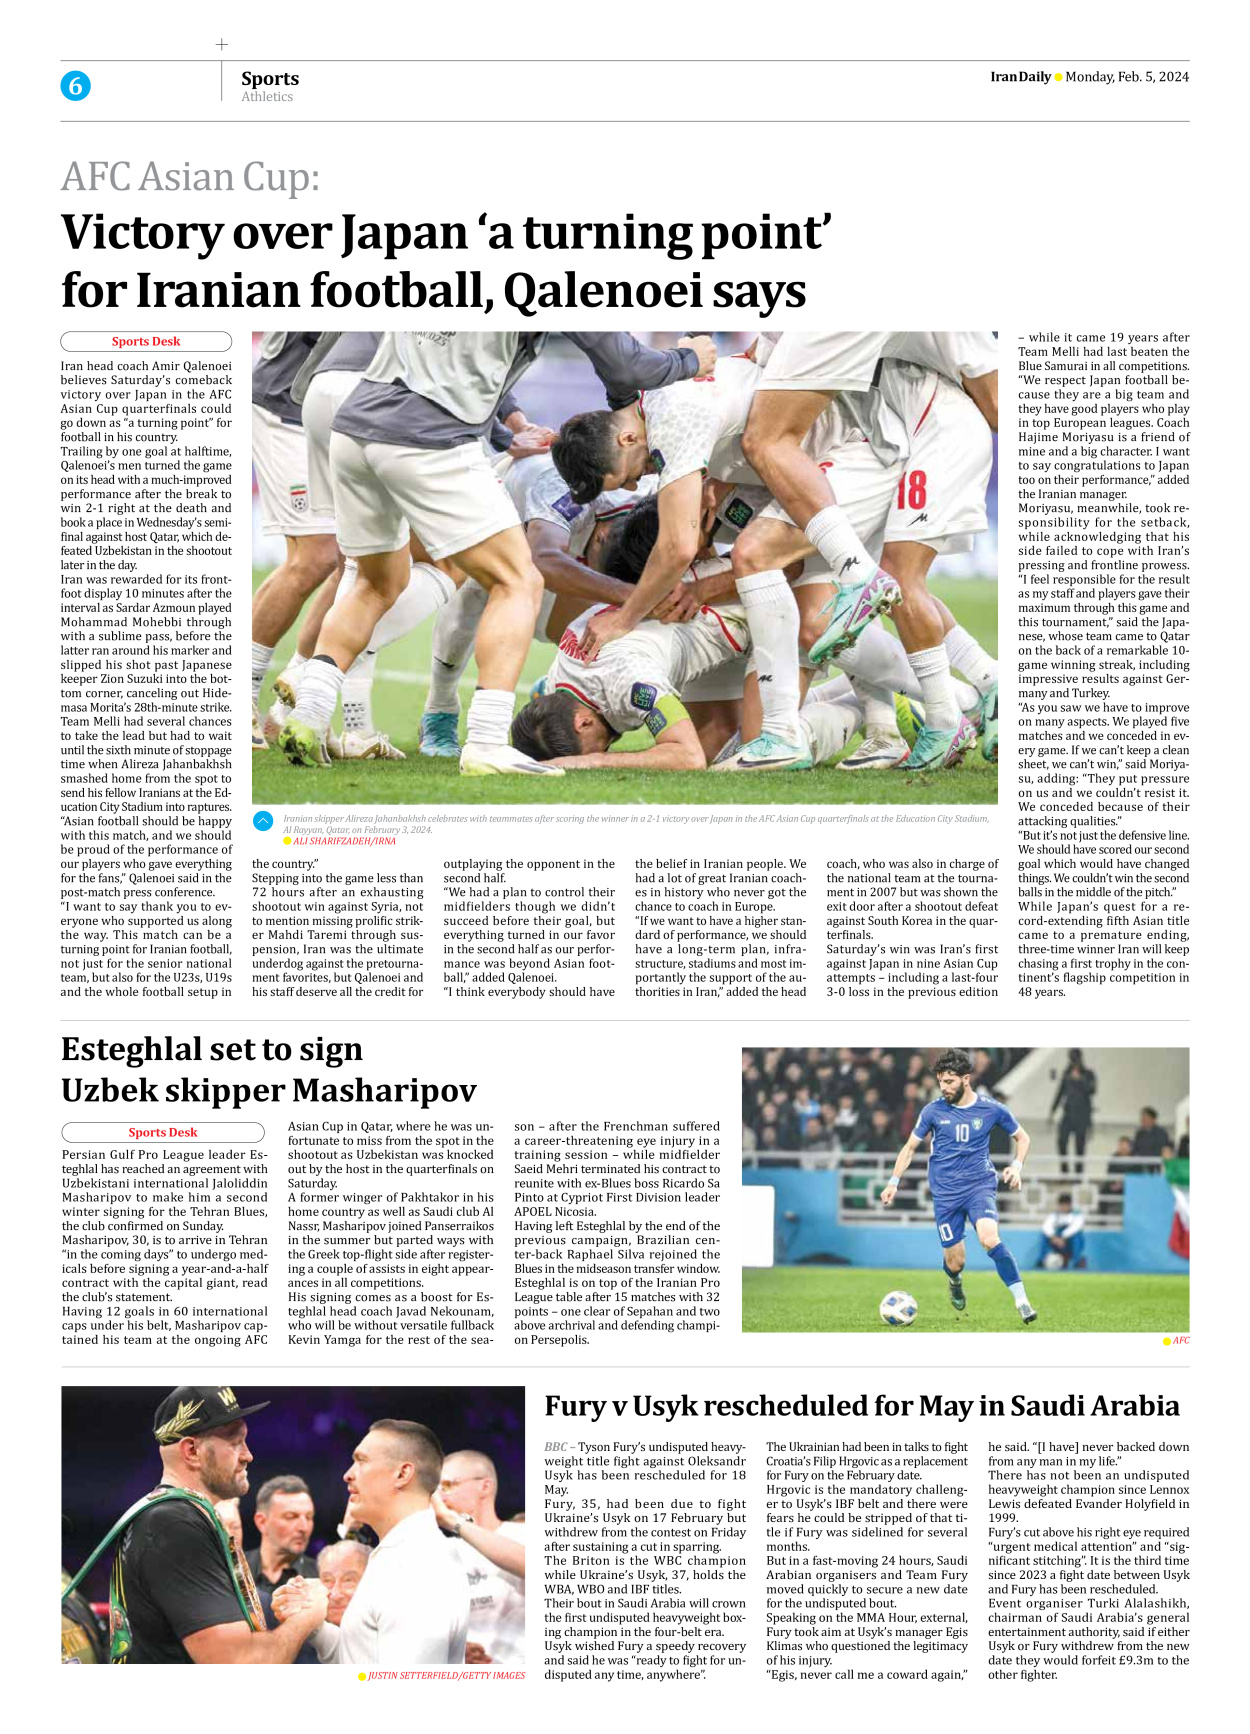 Iran Daily - Number Seven Thousand Five Hundred and Two - 05 February 2024 - Page 6